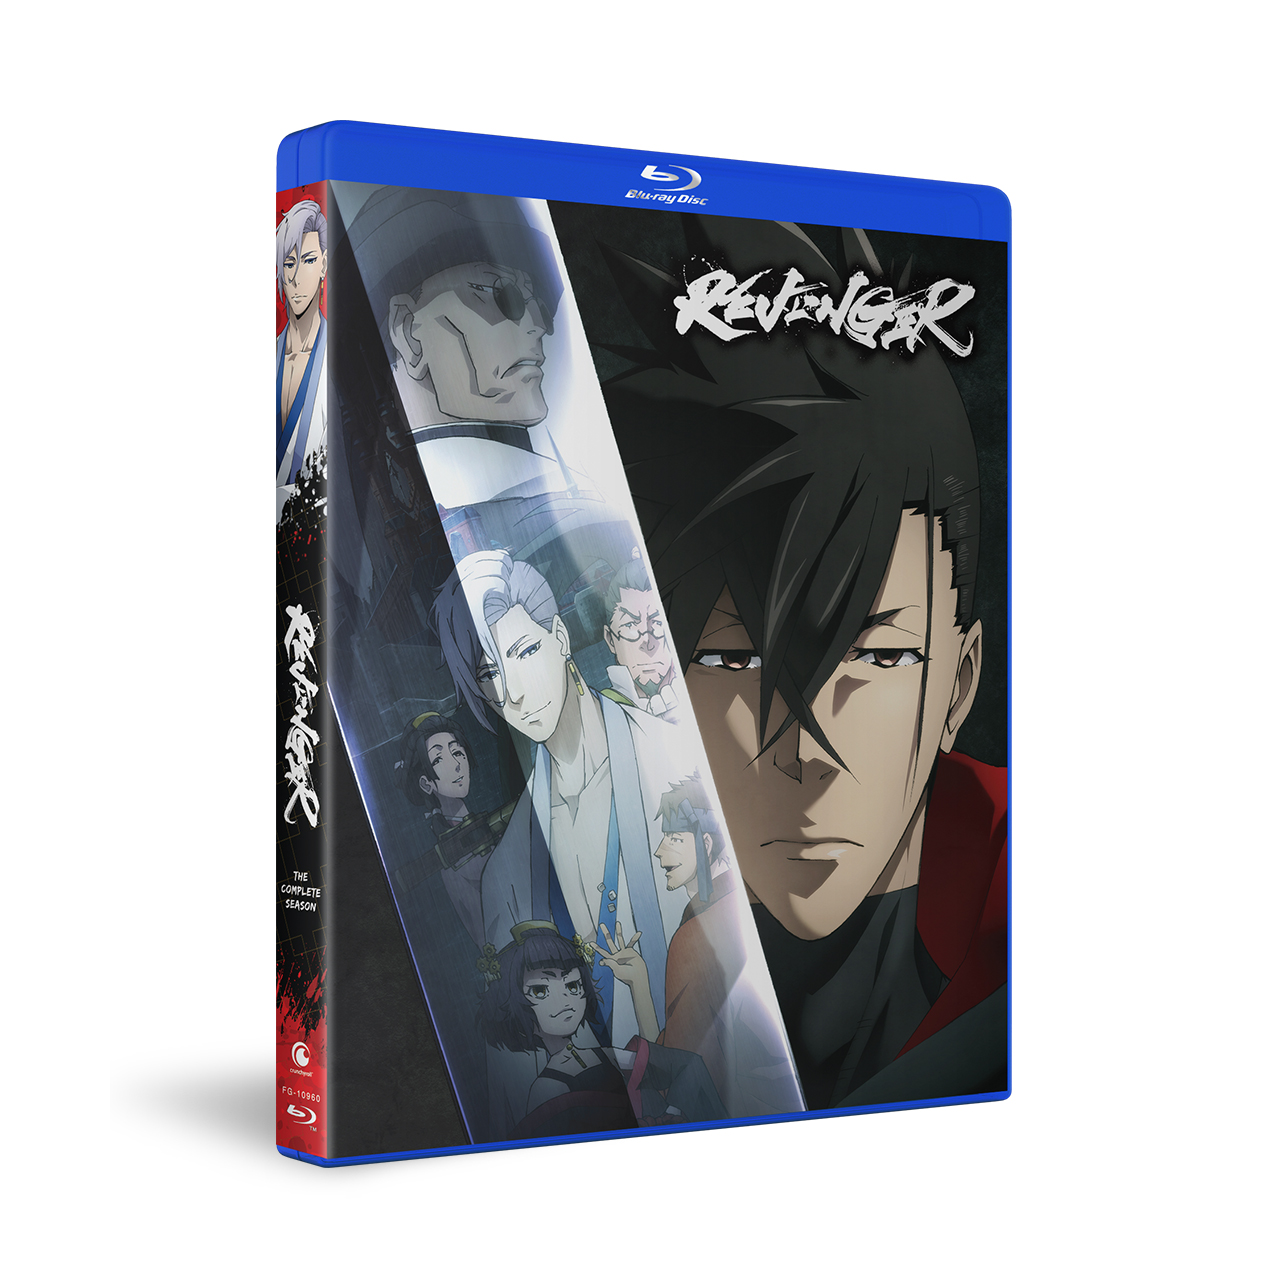 Revenger - The Complete Season - Blu-ray image count 1